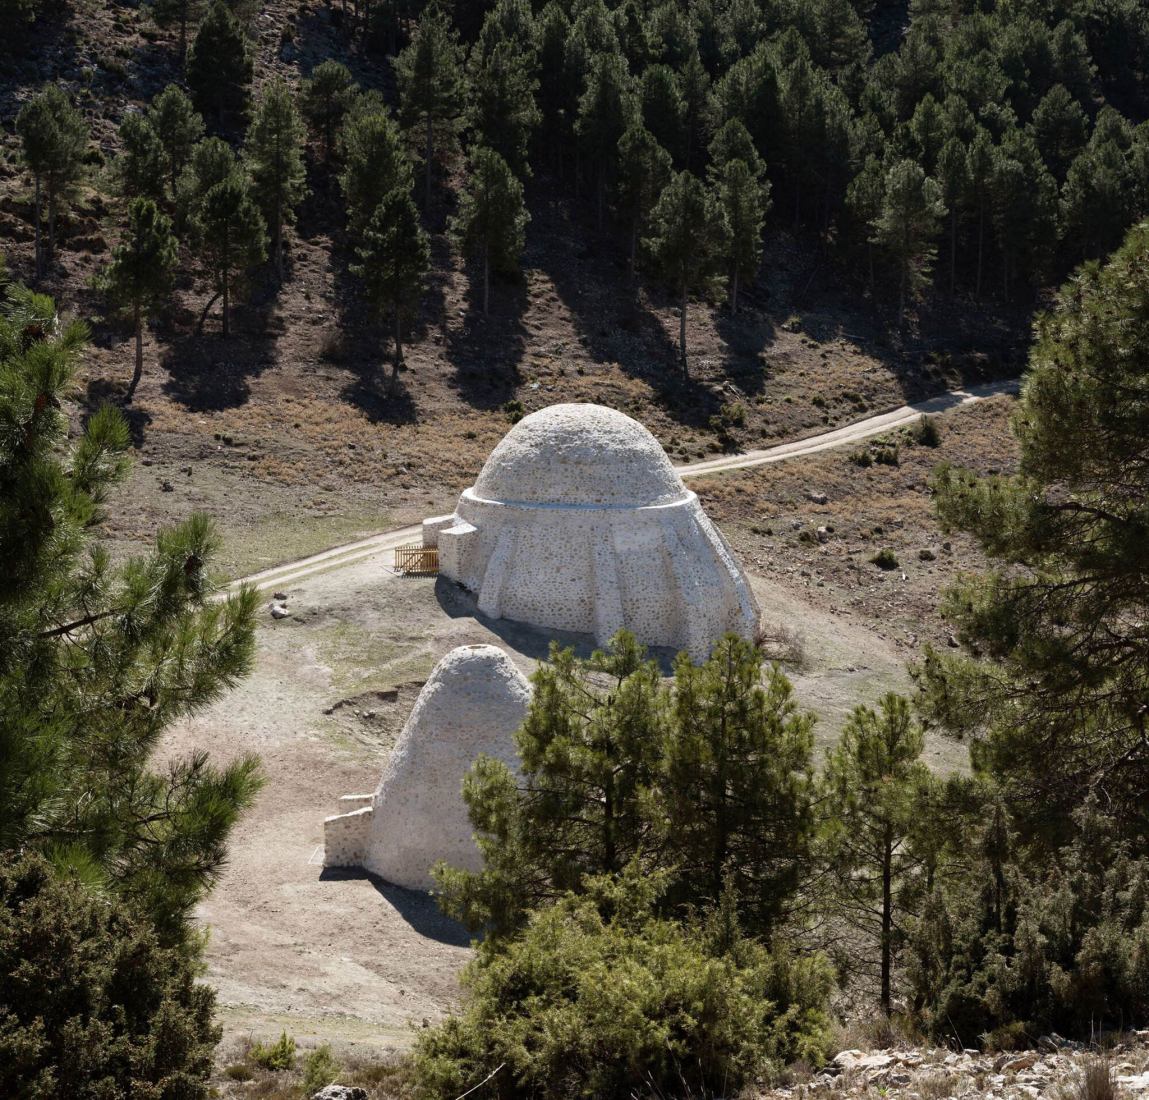 Restoration of two snow wells in Sierra Espuña by Ecoproyecta. Photography by David Frutos.